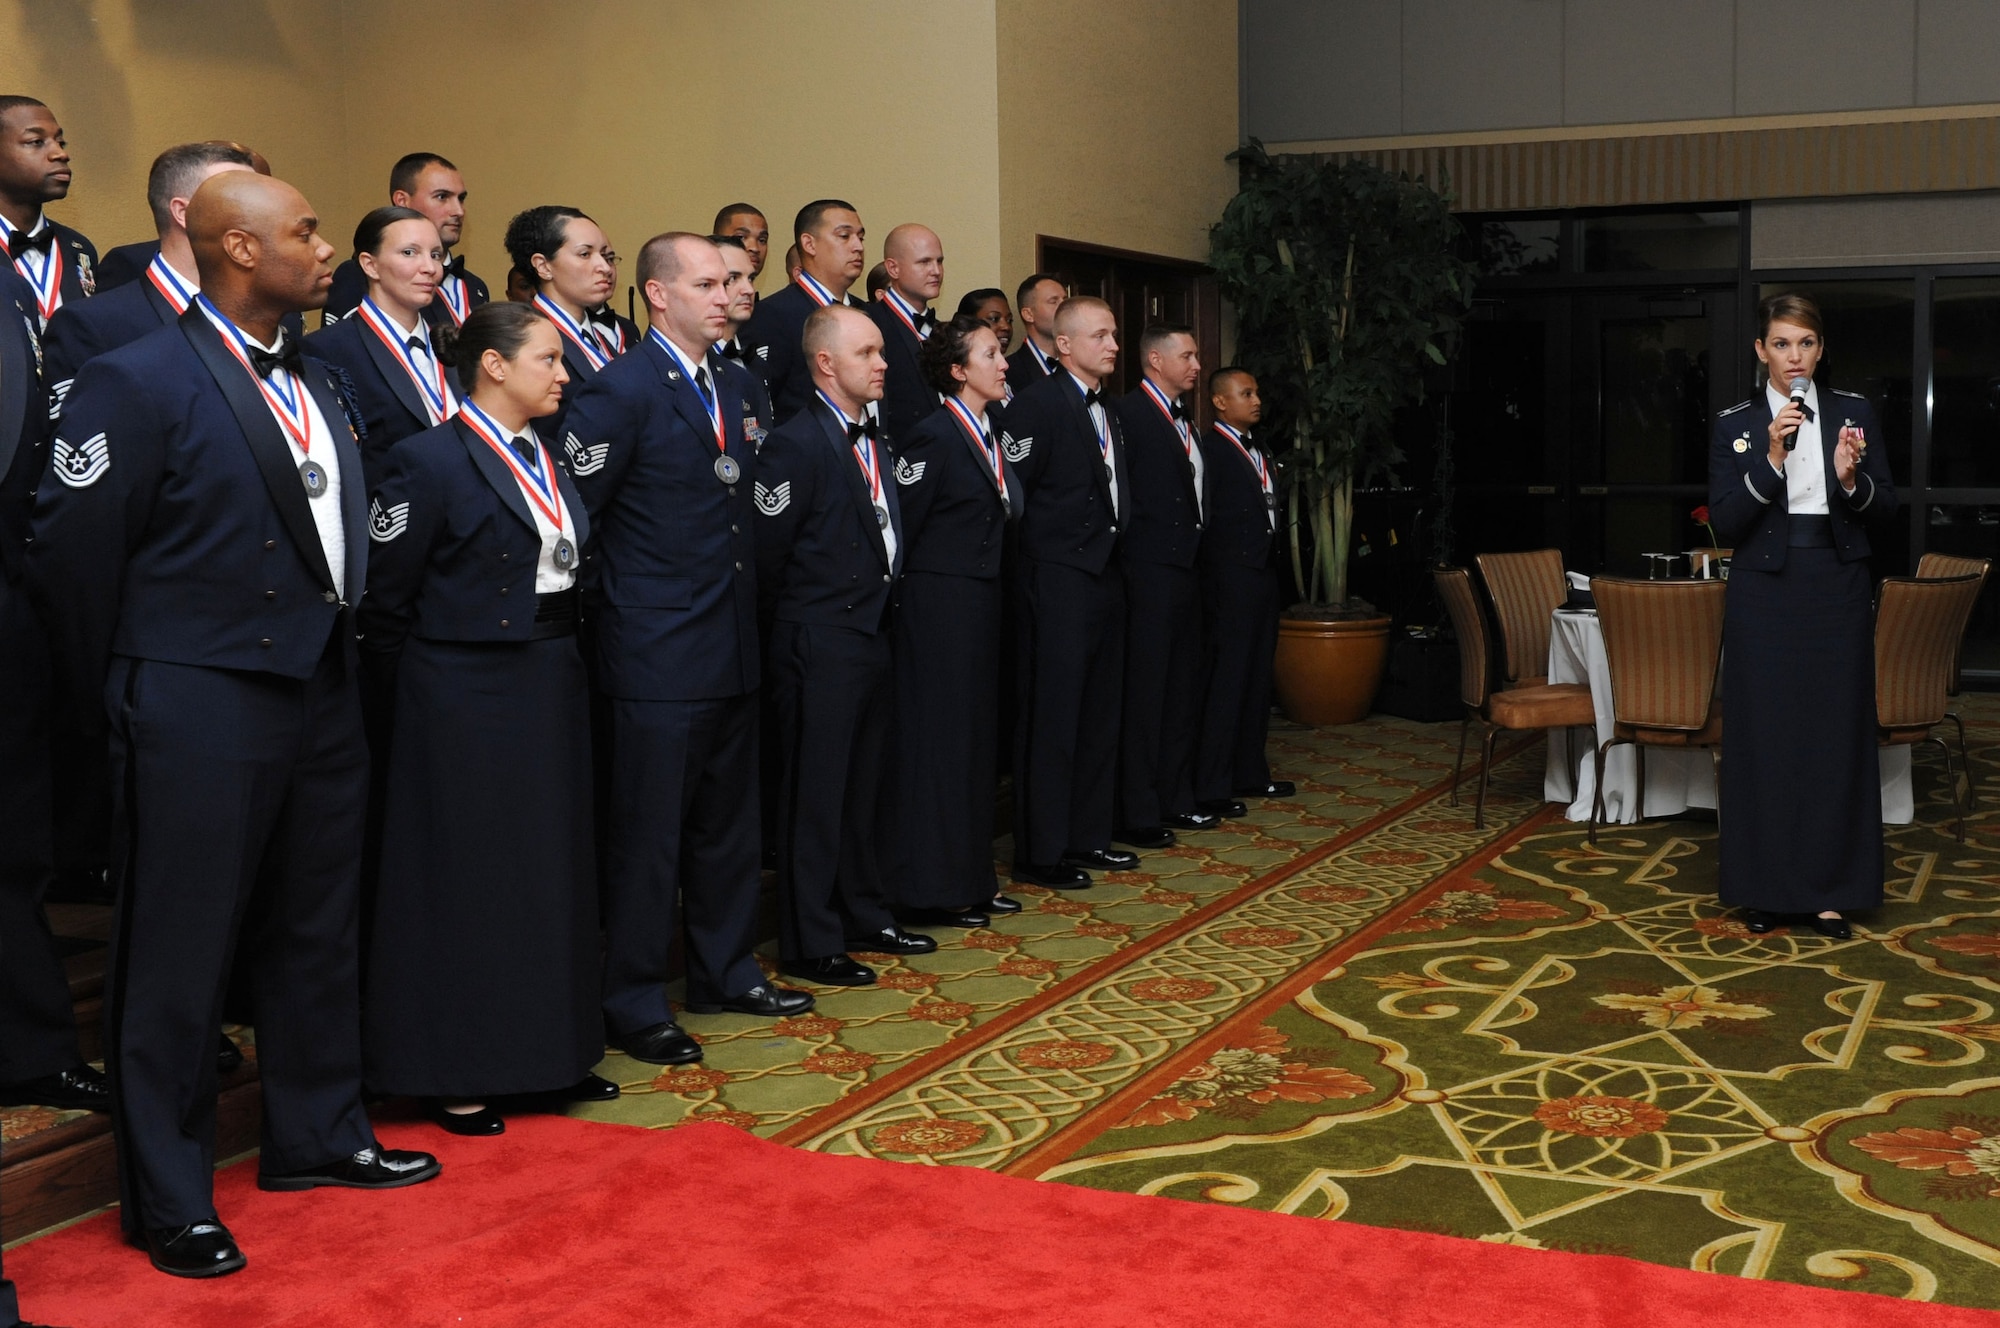 Col. Michele Edmondson, 81st Training Wing commander, delivers remarks during the Senior Noncommissioned Officer Induction Ceremony at the Bay Breeze Event Center Aug. 18, 2016, on Keesler Air Force Base, Miss. Thirty-seven enlisted members were recognized and received a commemorative medallion at the event. (U.S. Air Force photo by Kemberly Groue/Released)